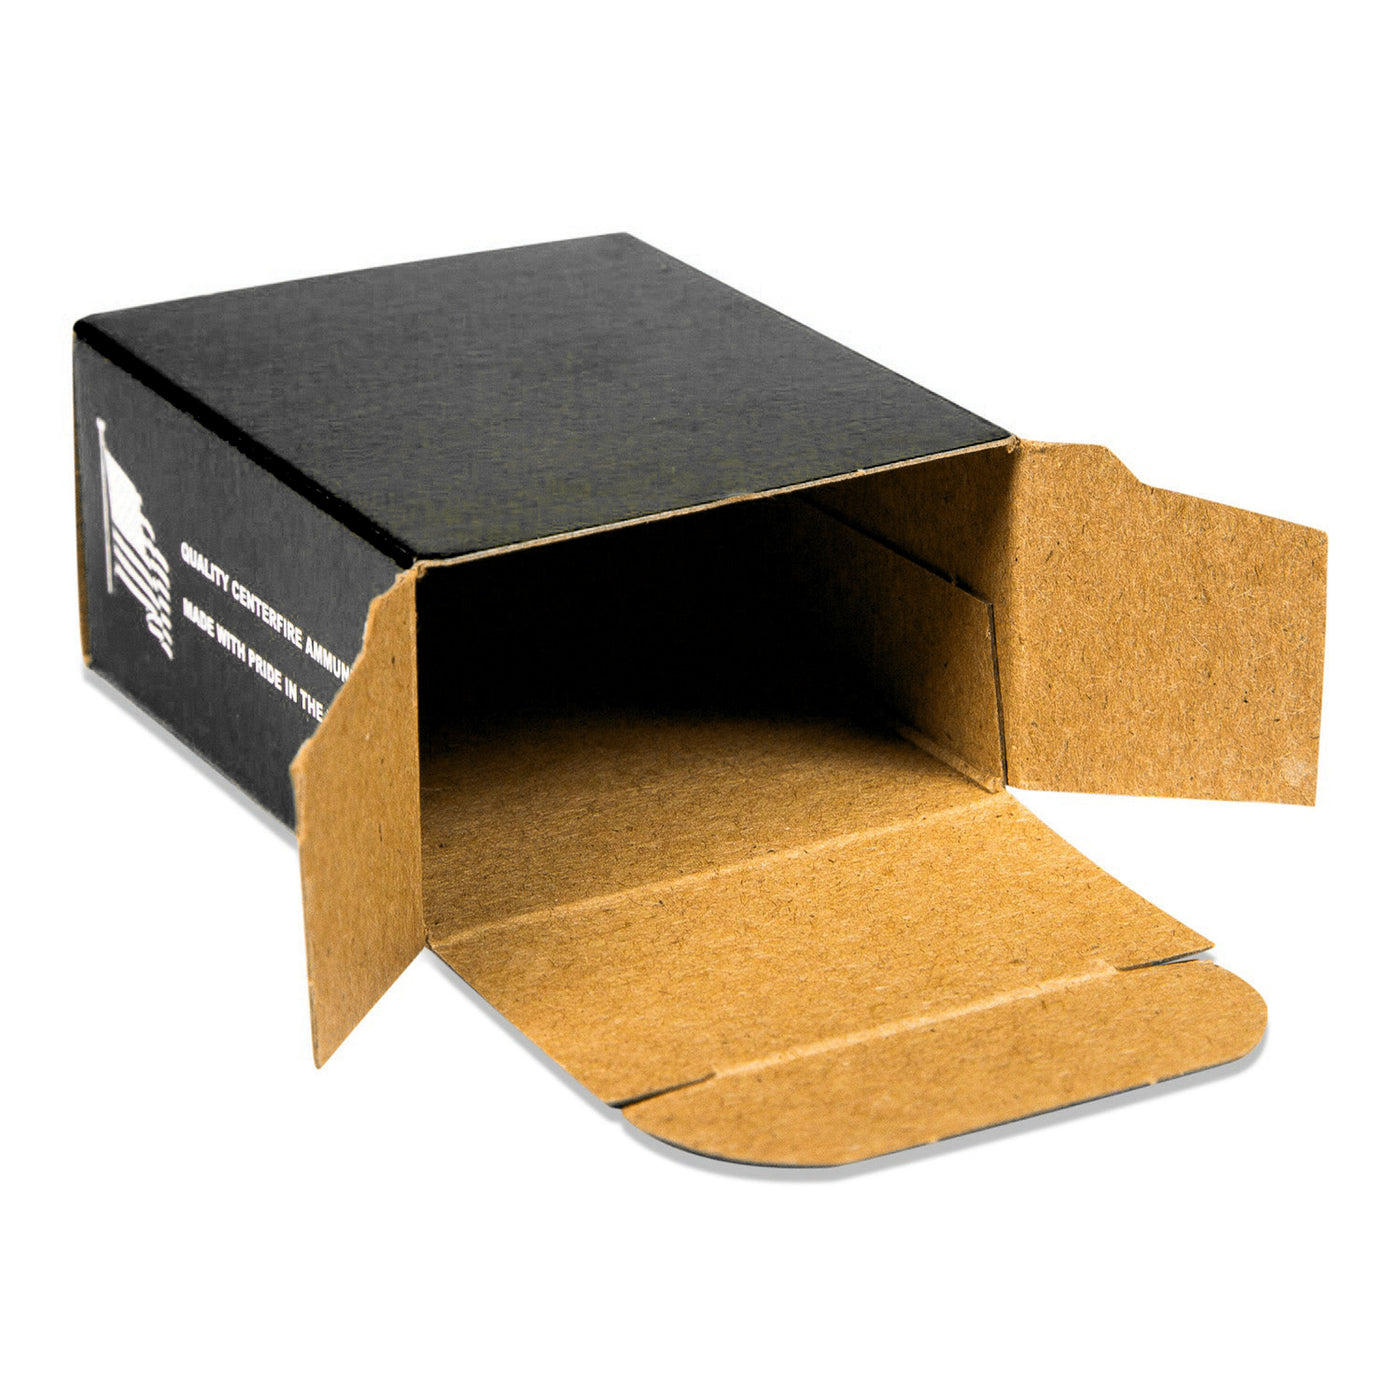 01 Cardboard Ammo Box for .380, 9mm, or .38 Super – Top Brass Reloading  Supplies